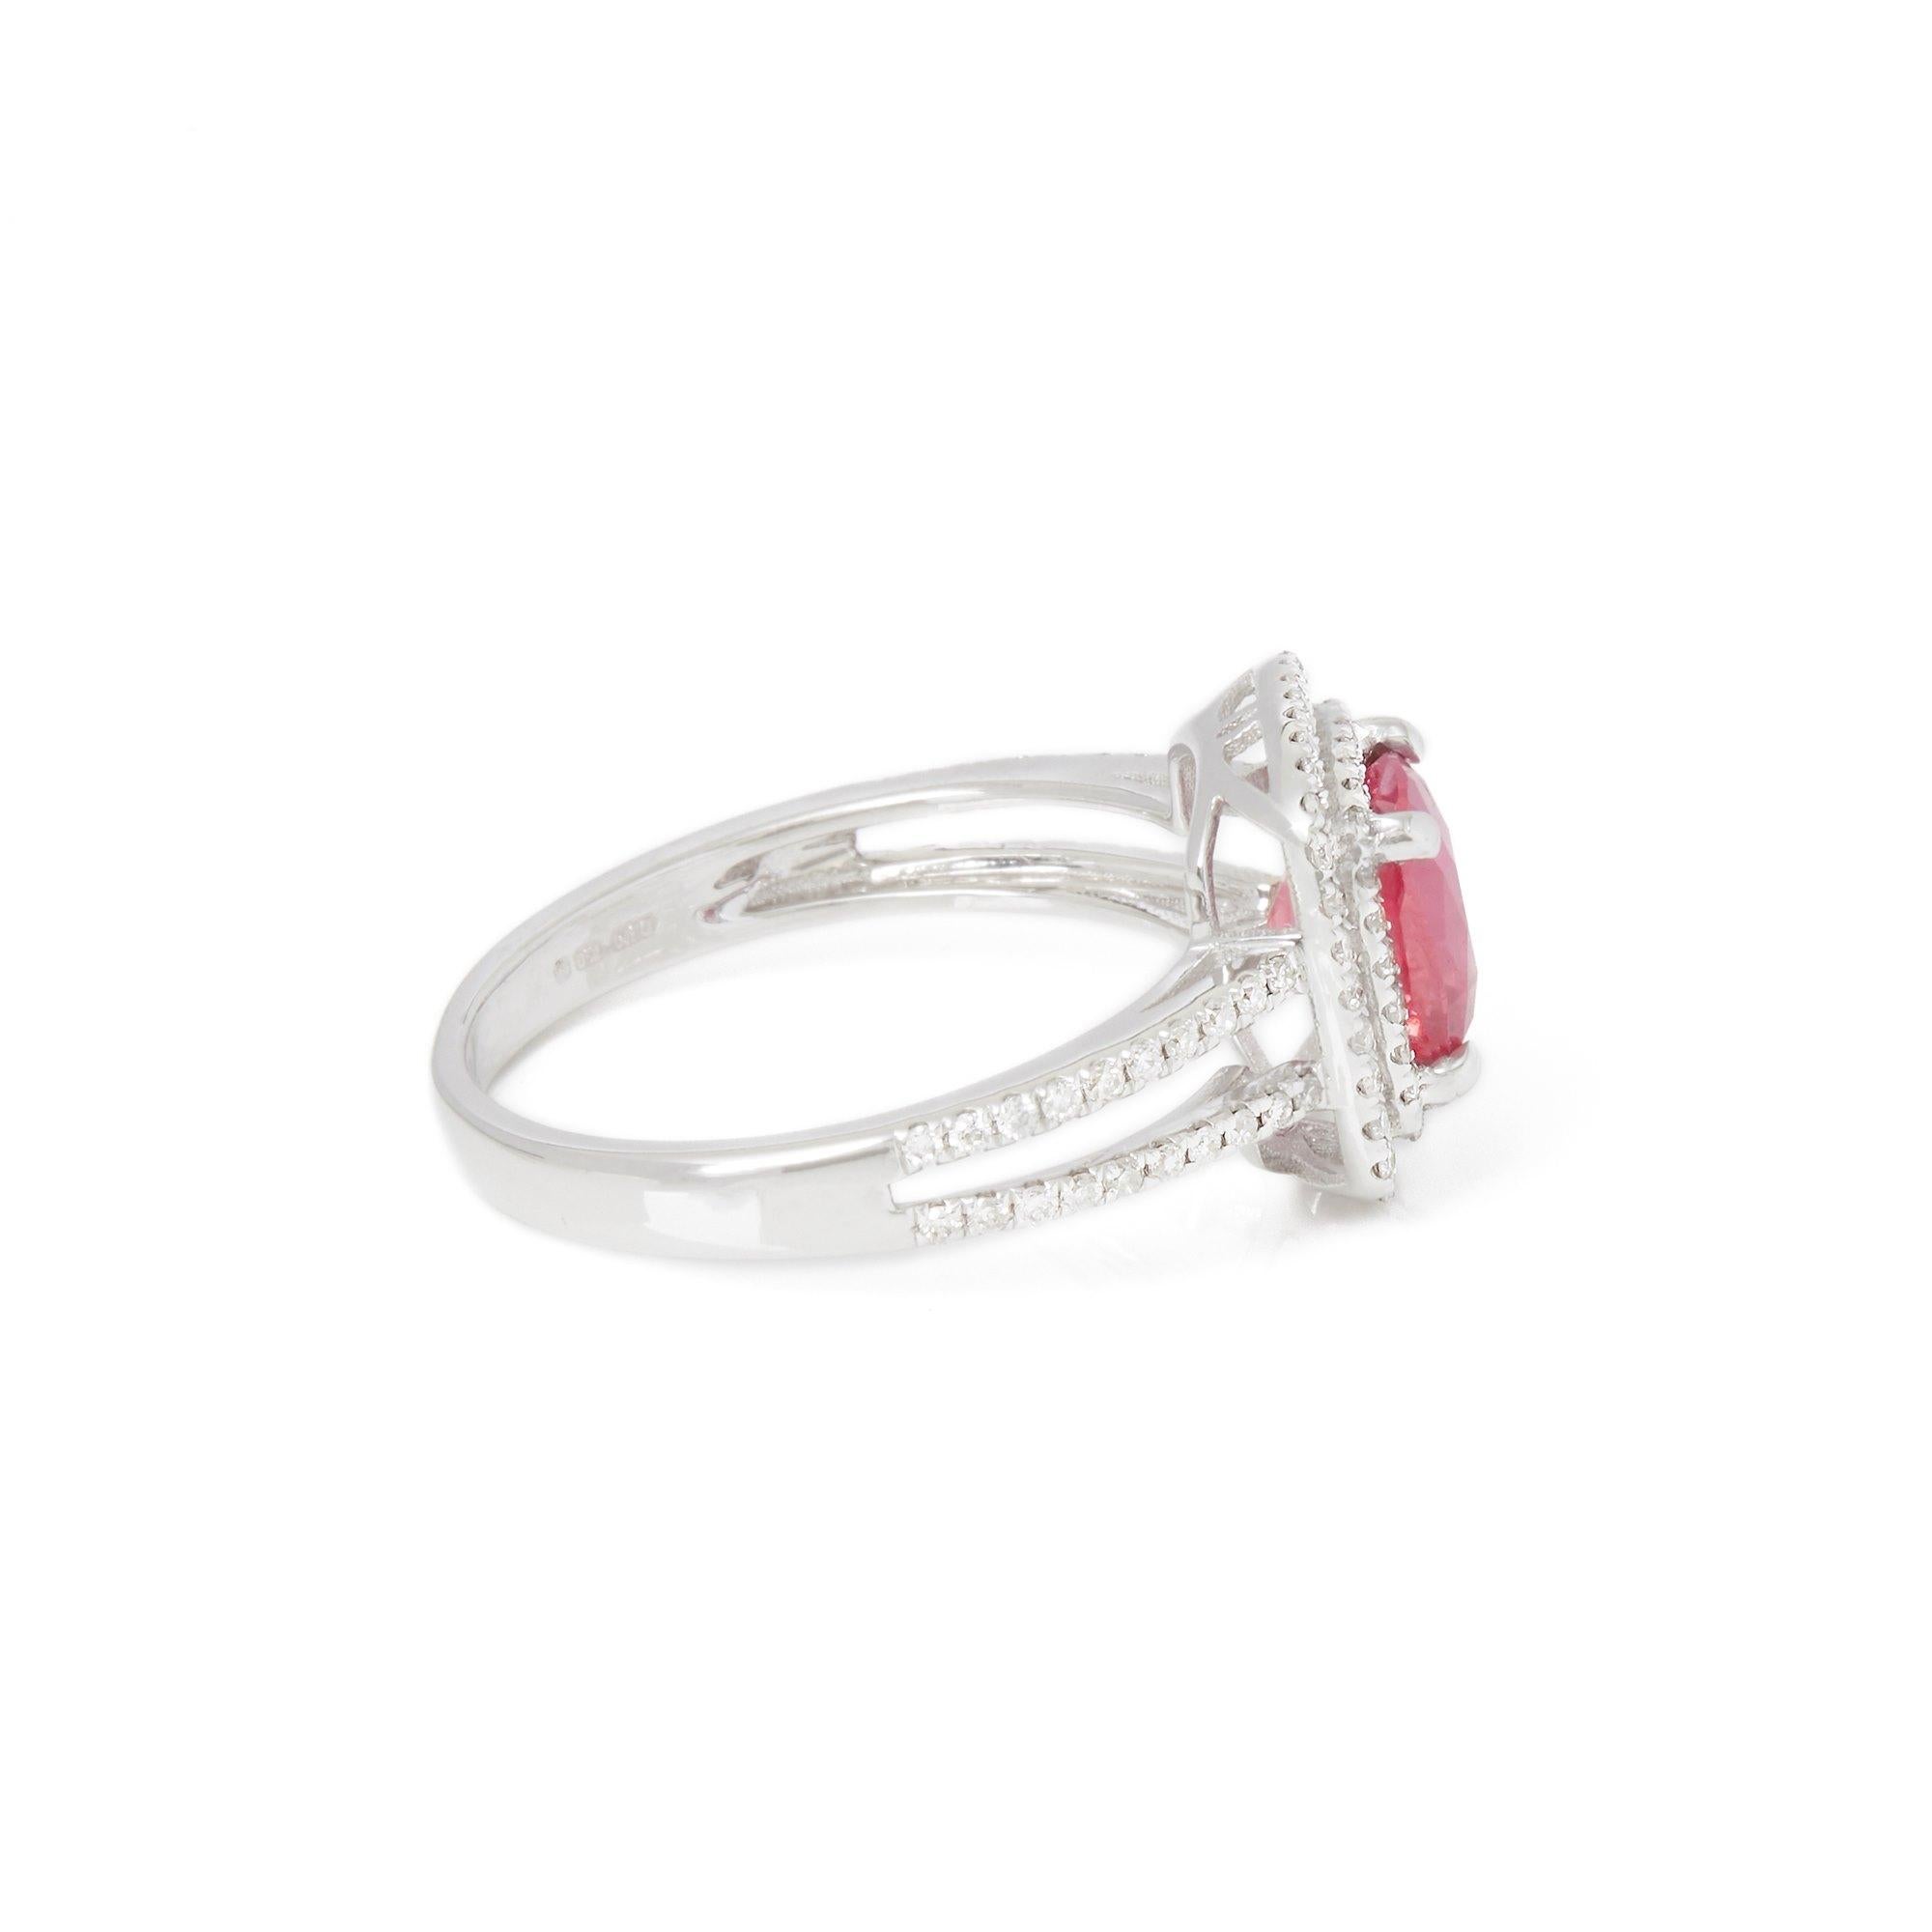 This ring designed by David Jerome is from his private collection and features one unheated natural cushion cut Ruby totalling 1.85cts sourced in Vietnam. Set with round brilliant cut Diamonds totalling 0.40cts mounted in an 18k white gold setting.